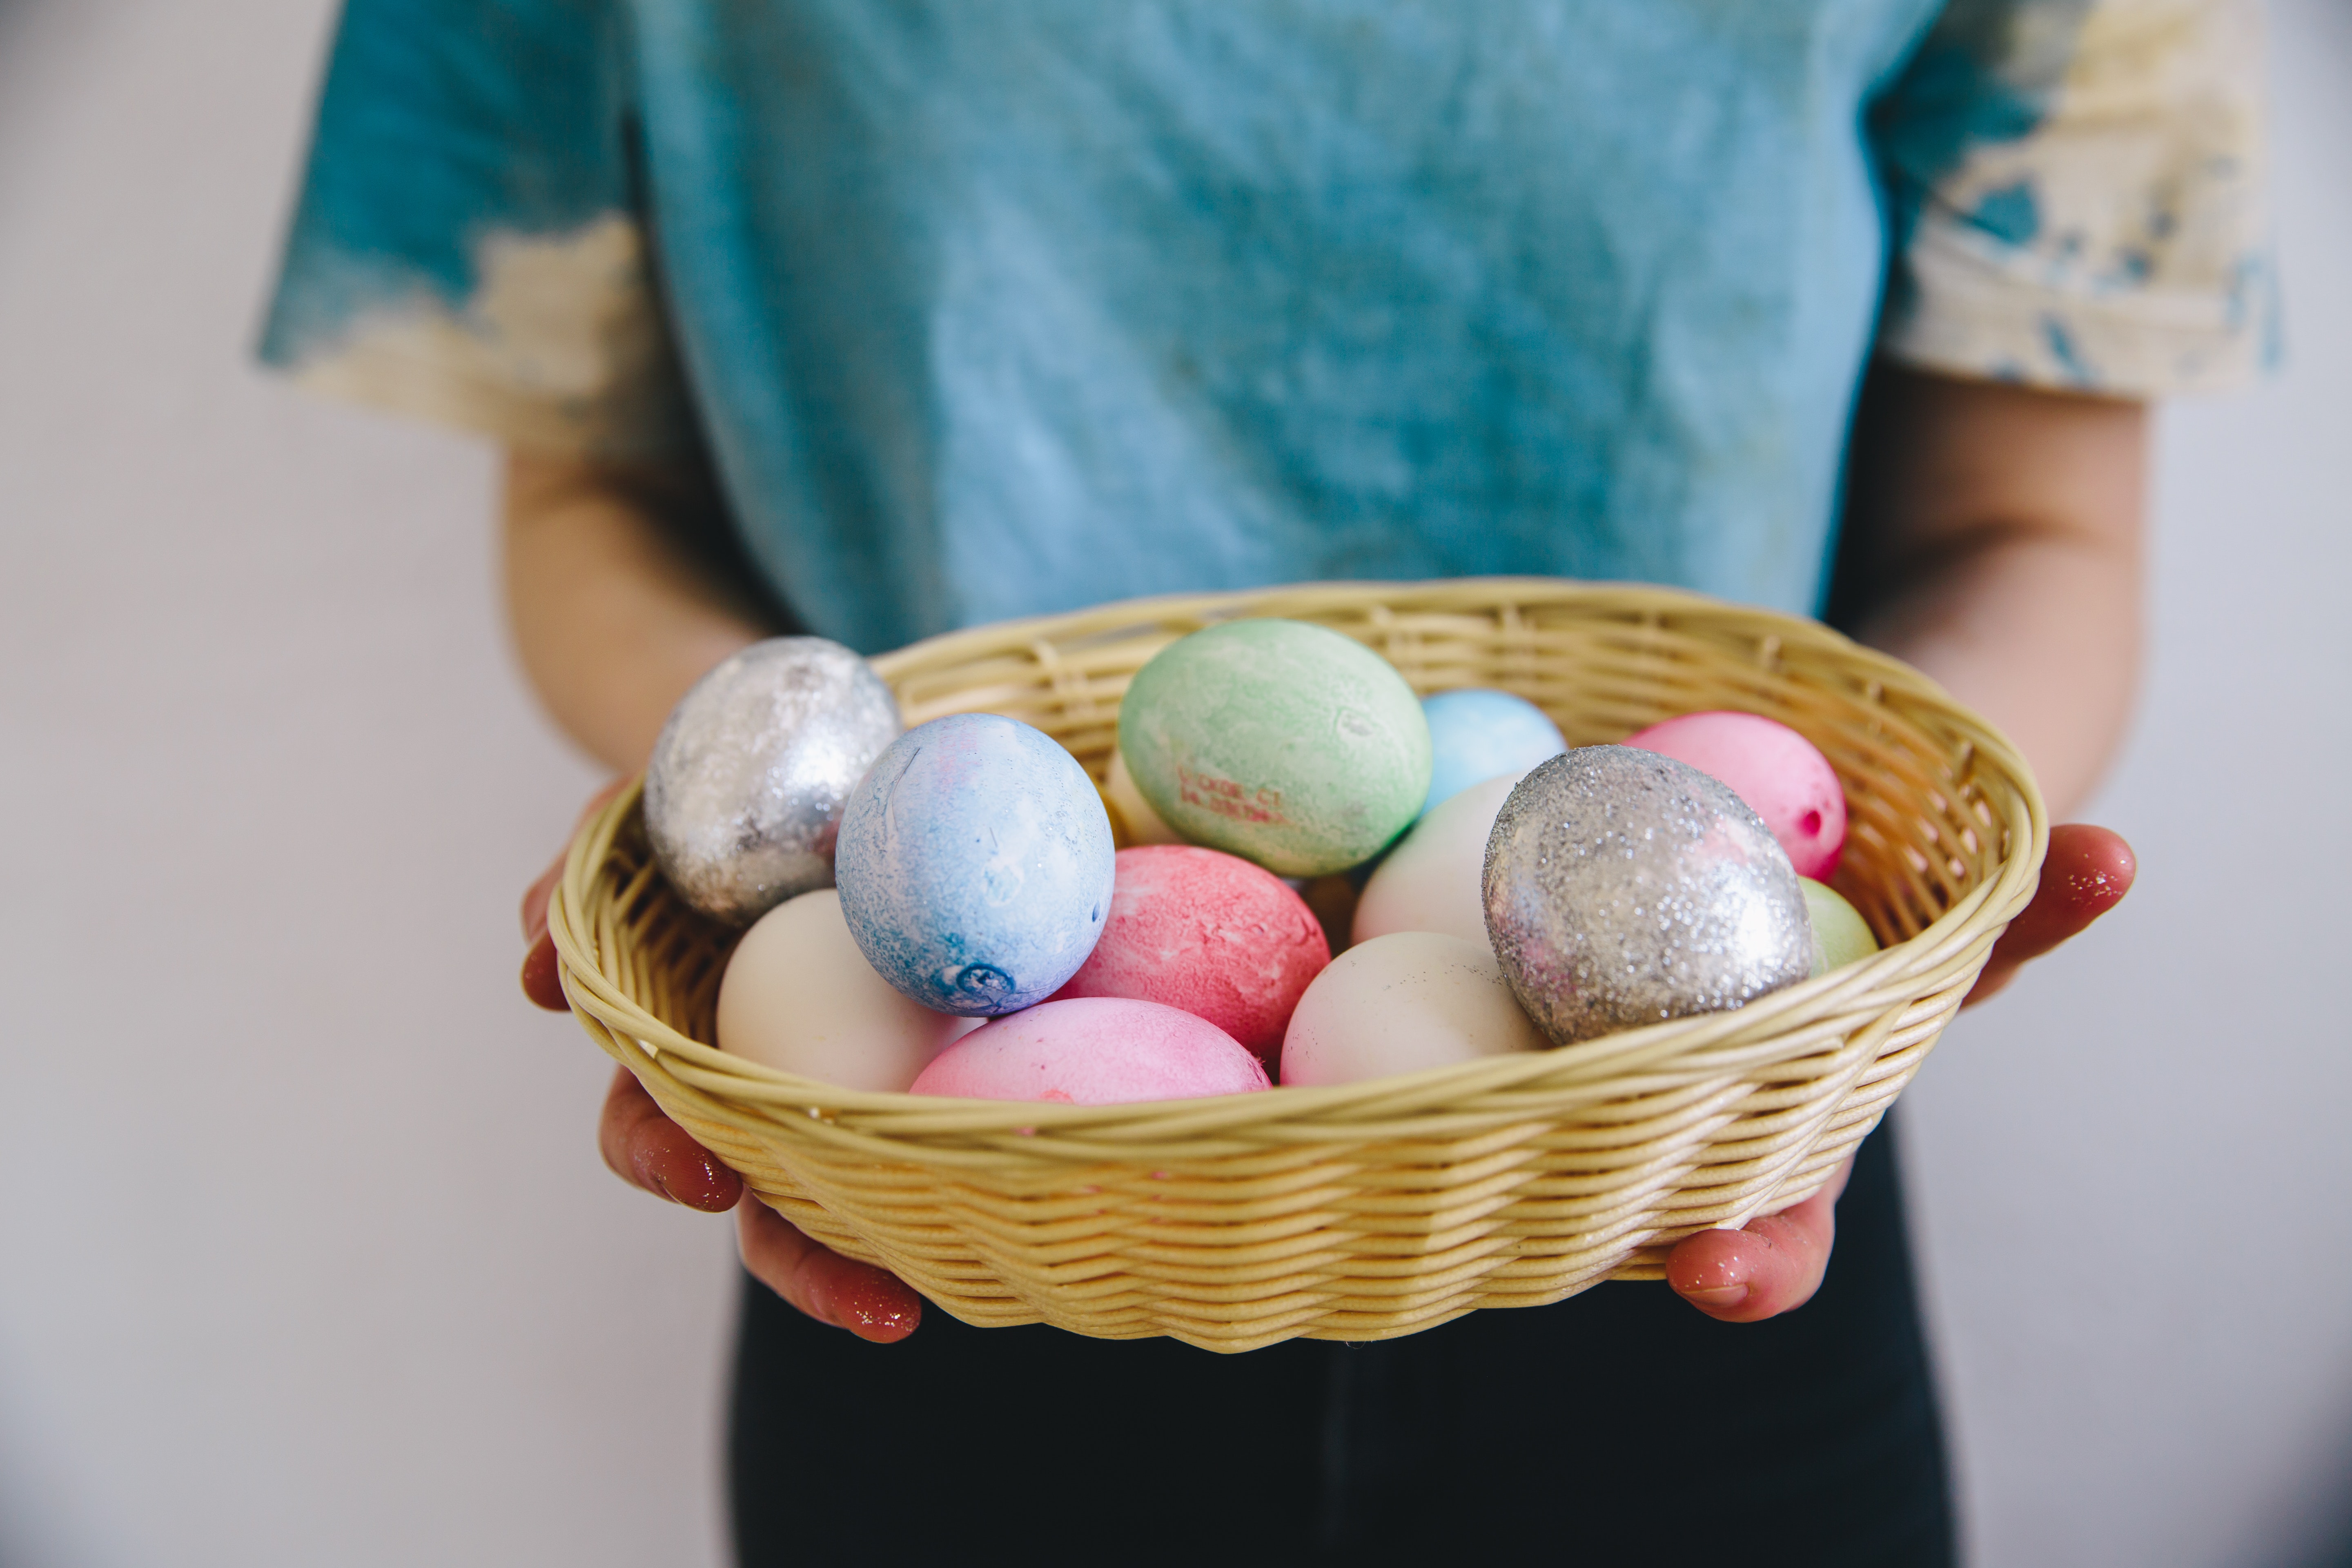 Ukraine is the birthplace of one of our favorite holiday traditions: Easter eggs!